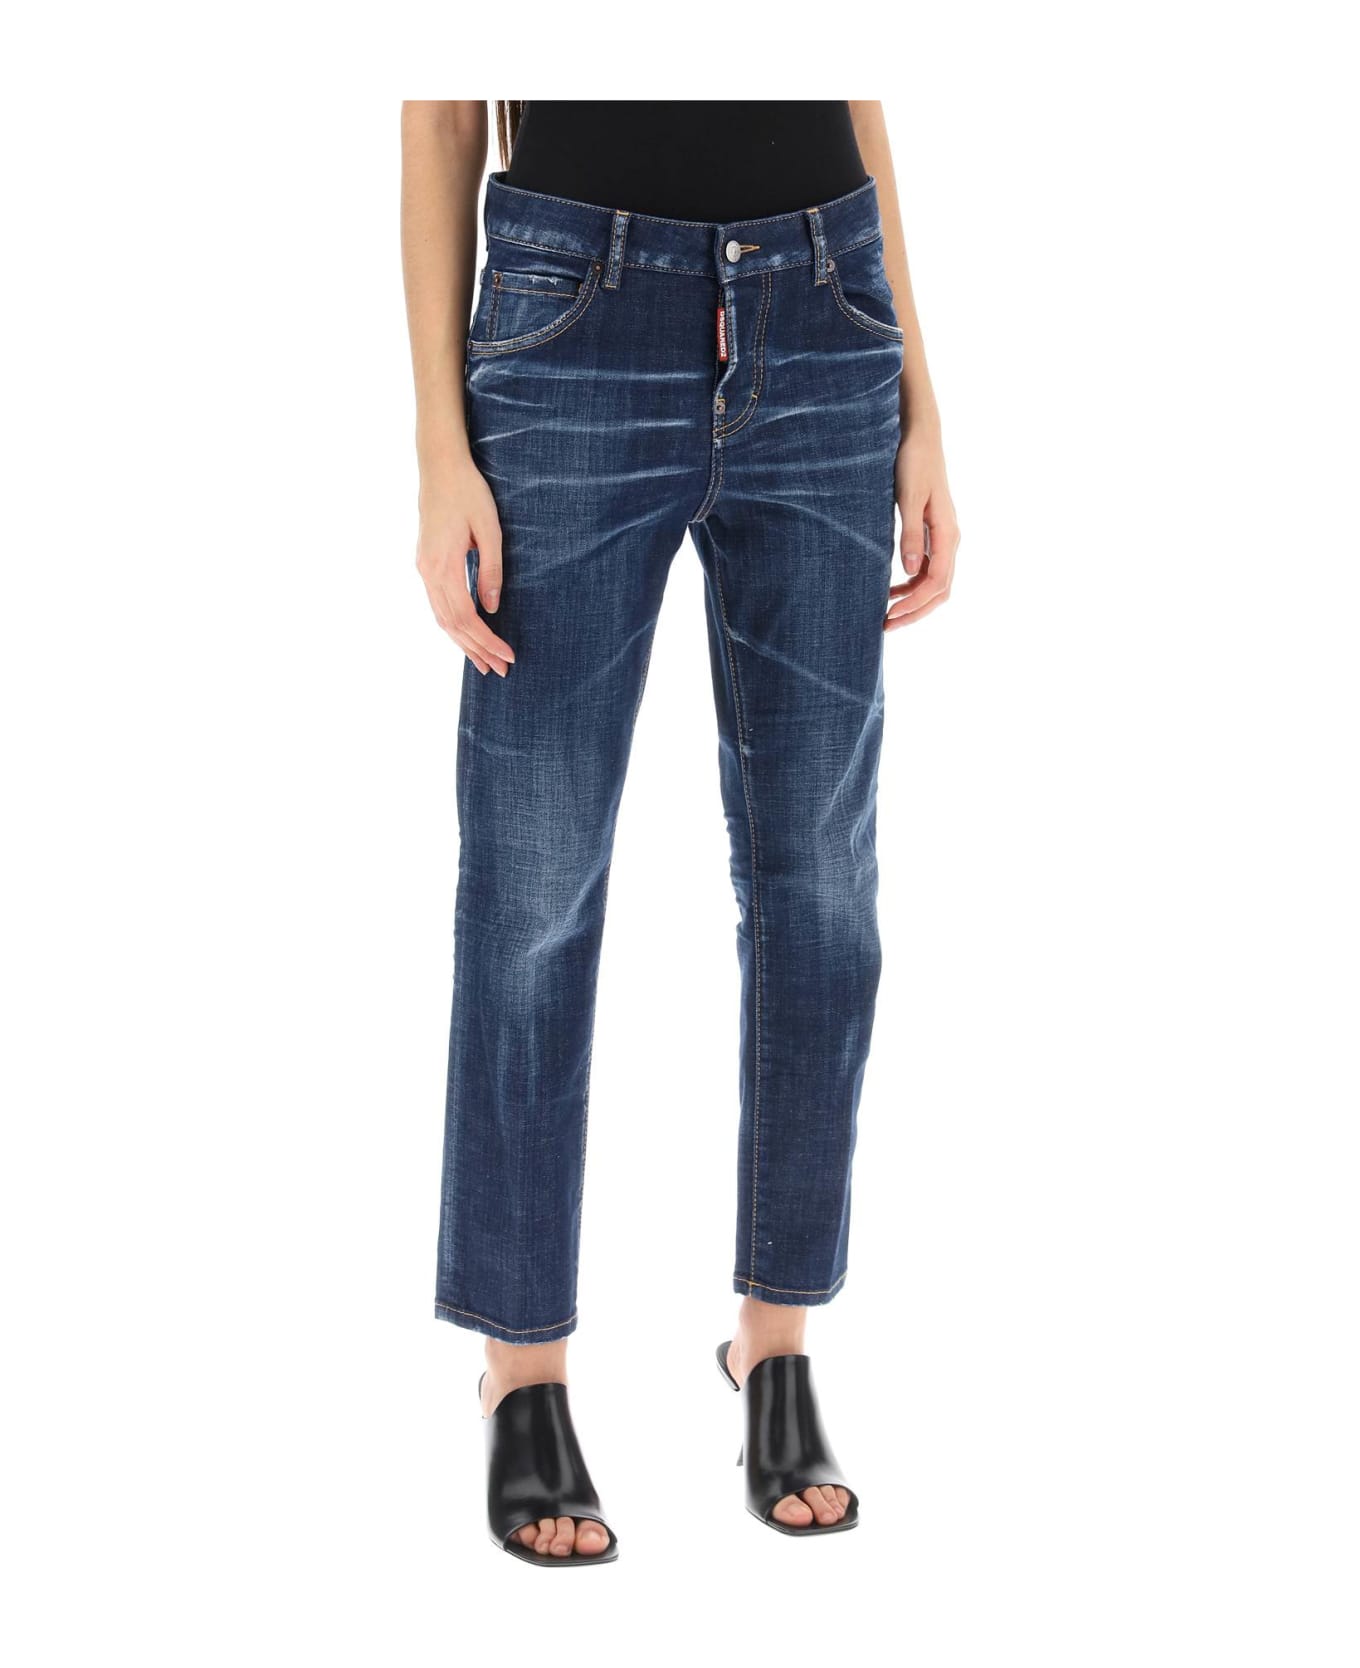 Dsquared2 'cool Girl' Jeans - NAVY BLUE (Blue)